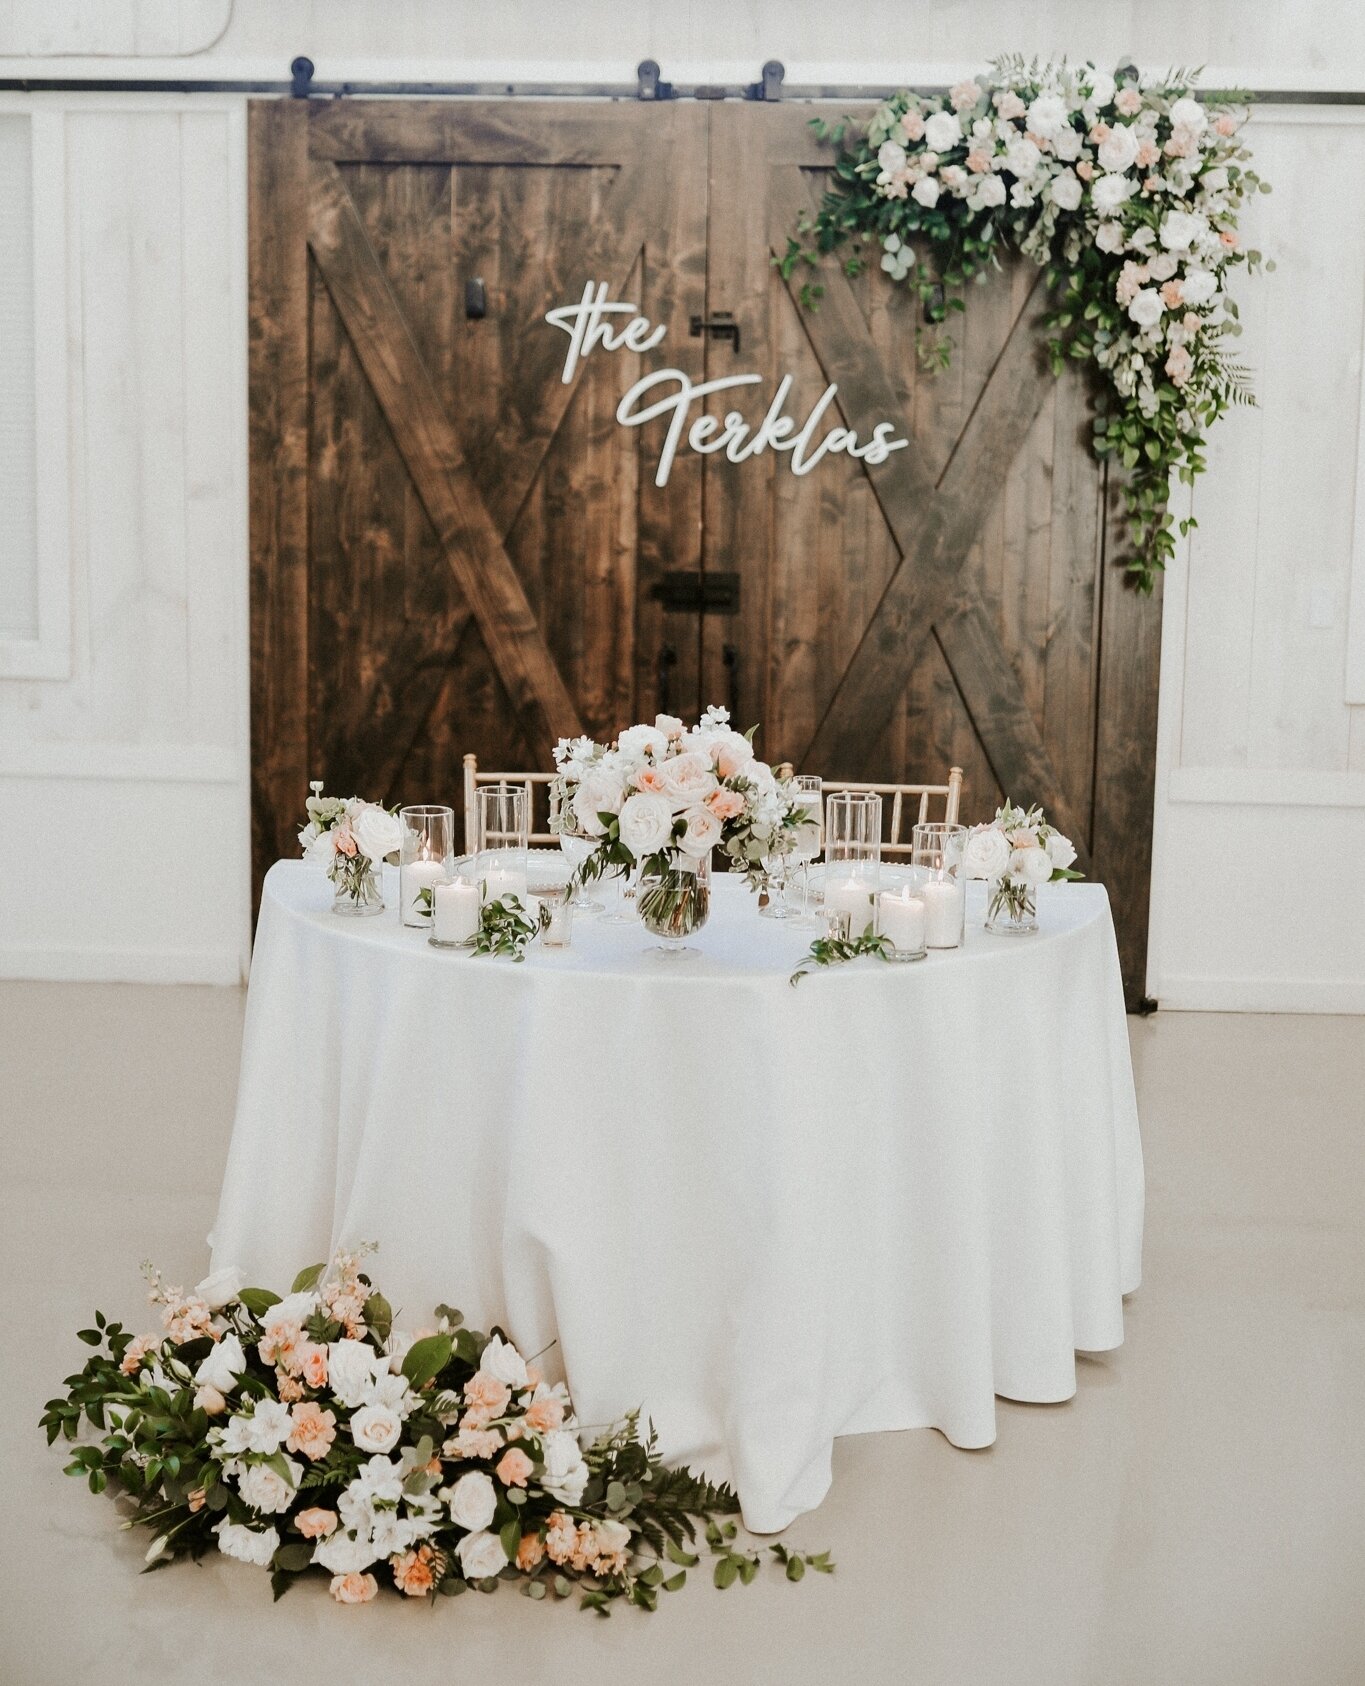 This sweetheart table set up &gt; ⁠
⁠
⁠We're coming at you with a couple of ways to spice up your sweetheart table! ⁠
⁠
💐 Decorate the table with some sort of centerpiece, you can never go wrong with florals! ⁠
💐 A backdrop can elevate the overall 